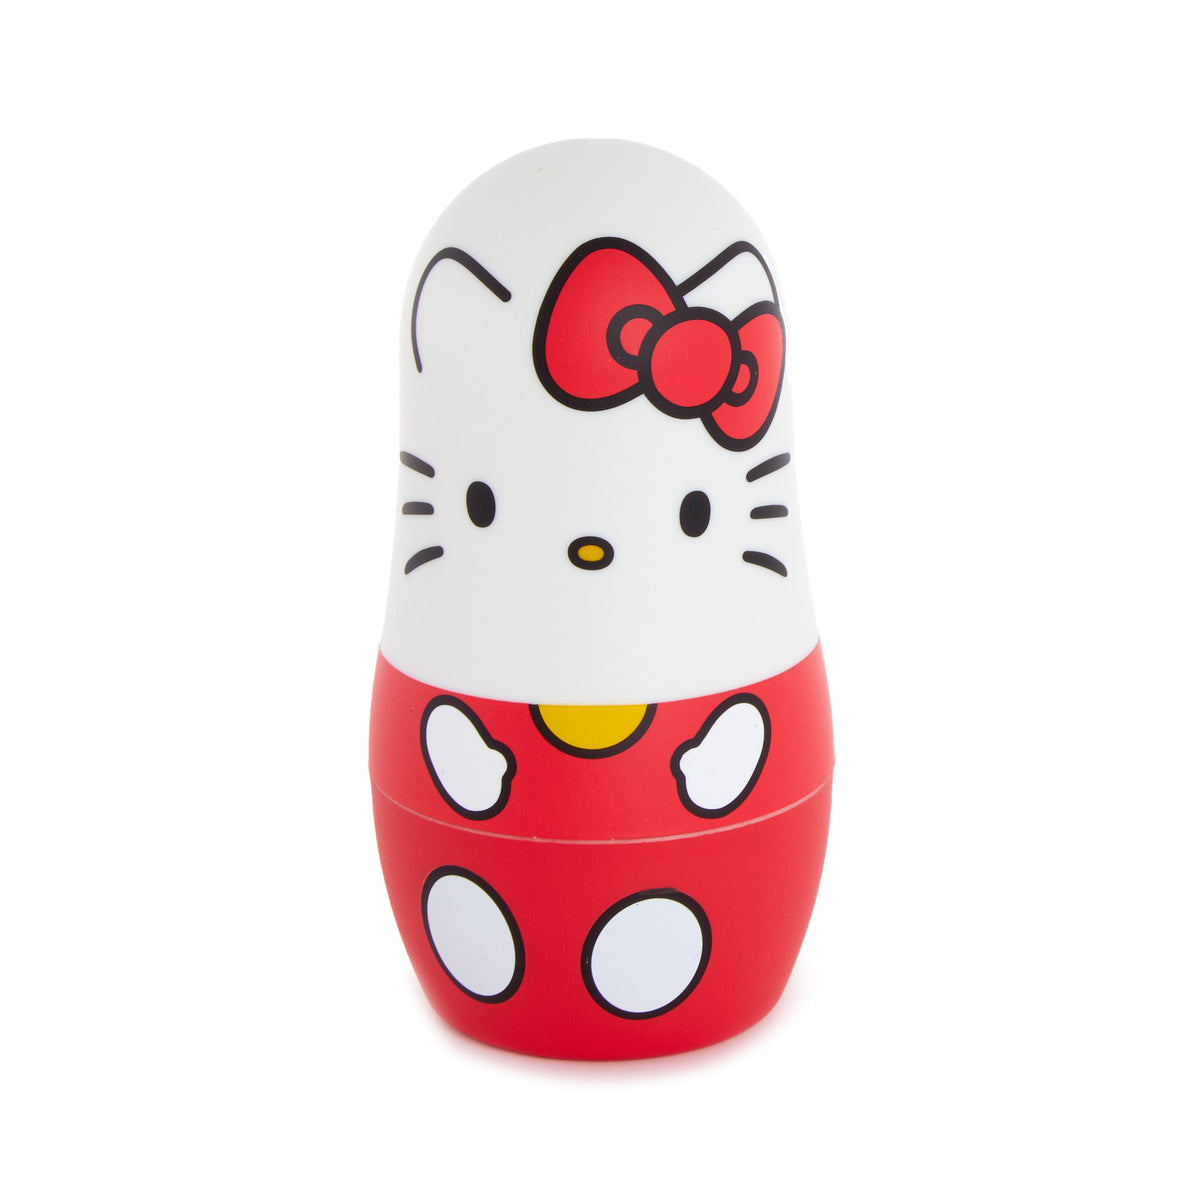 Hello Kitty and Friends Nesting Dolls Home Goods HUNET GLOBAL CREATIONS INC   